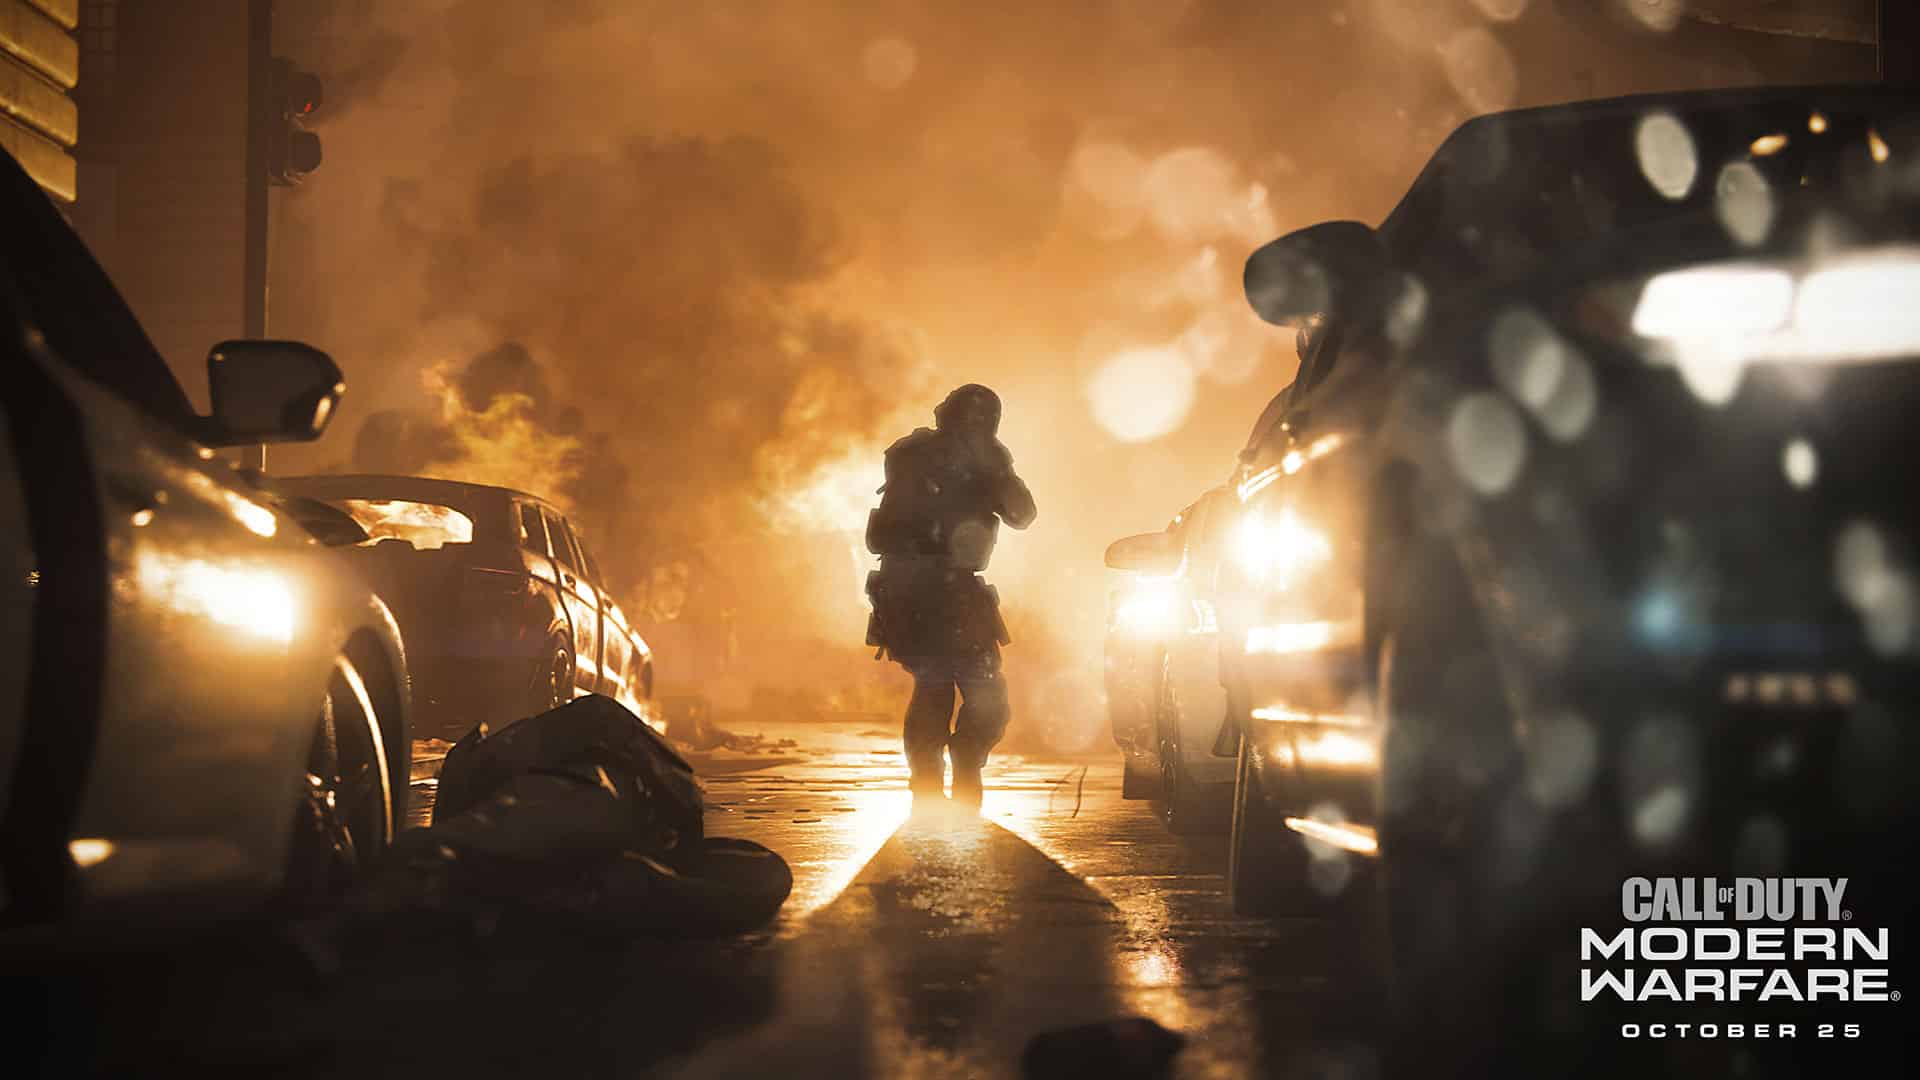 A still from the game